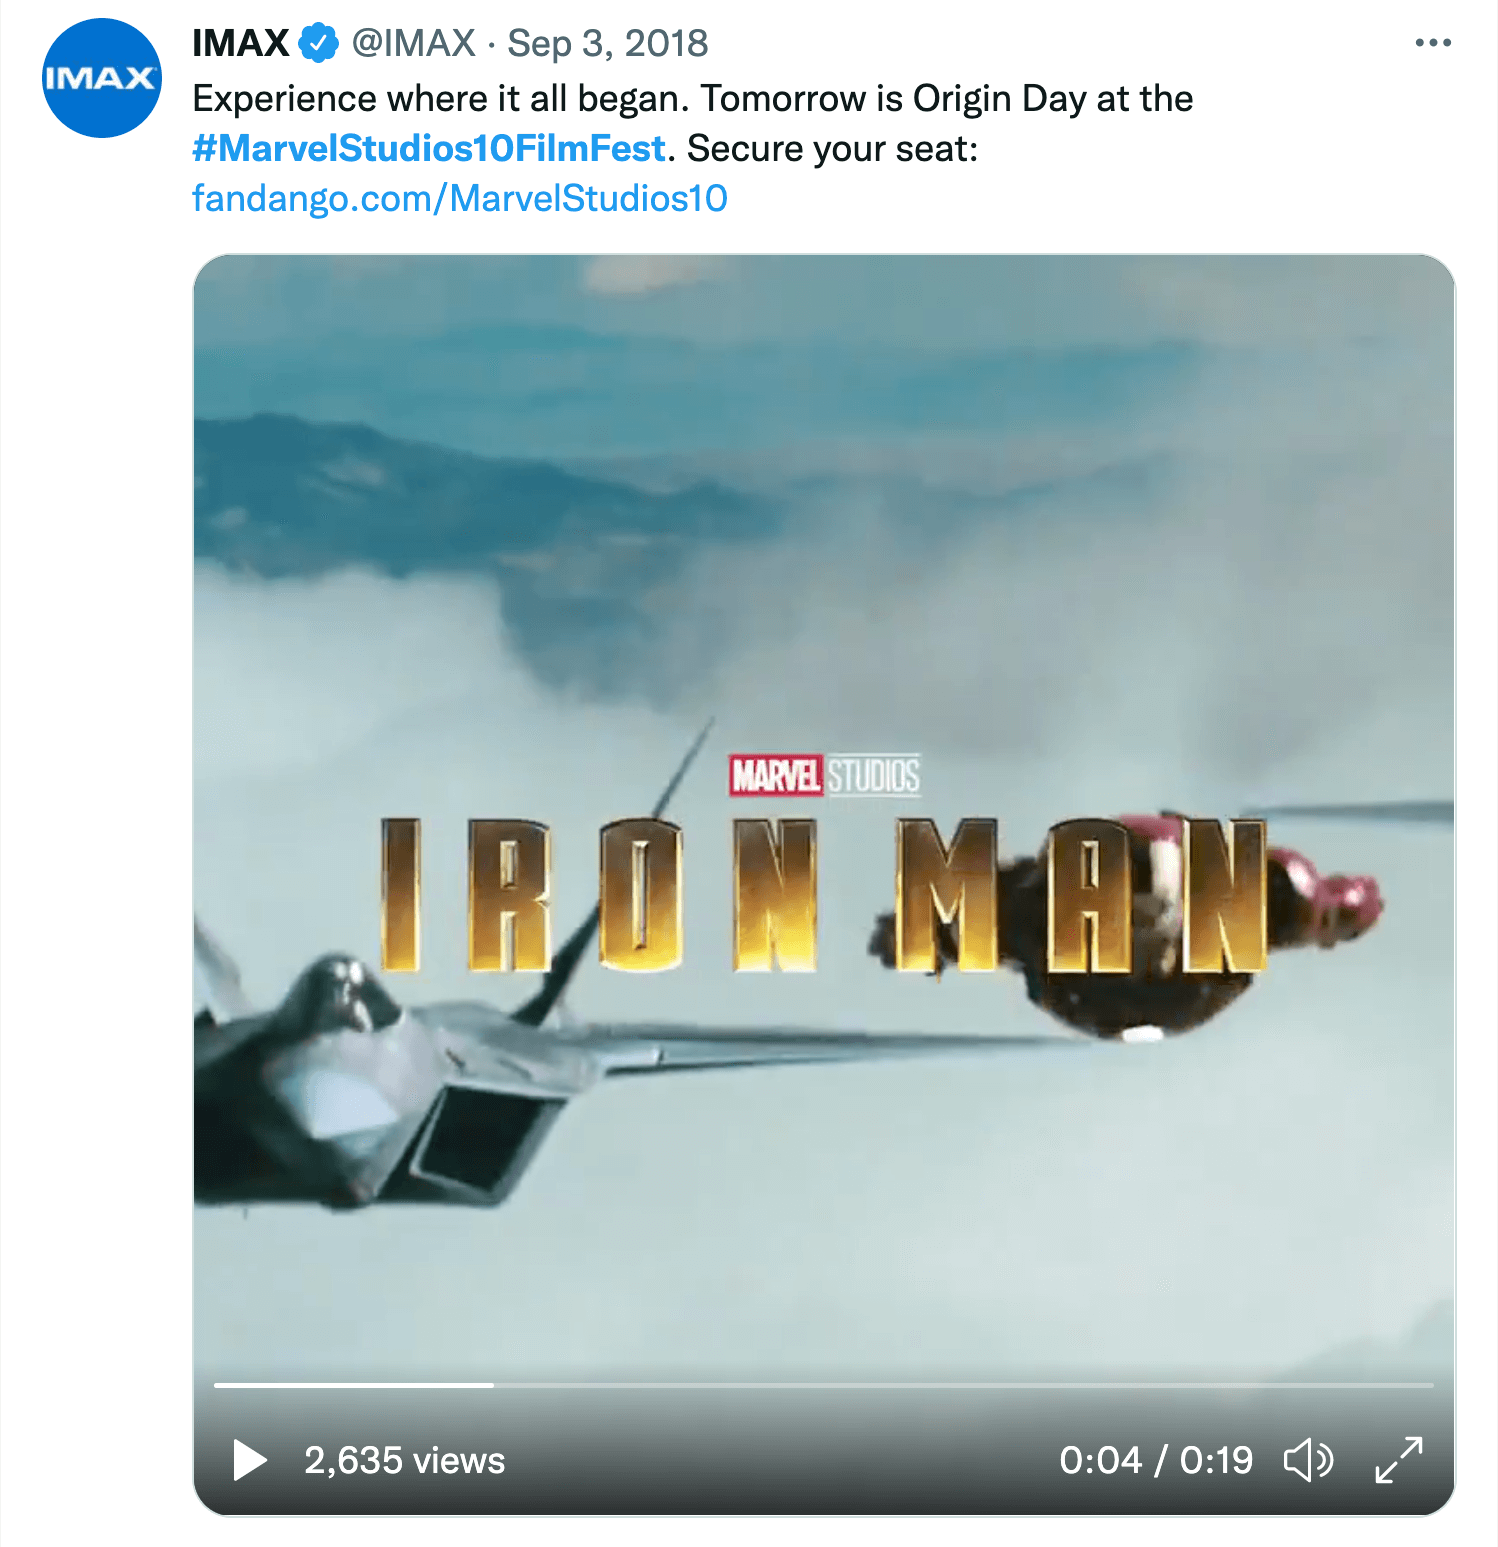 image of IMAX tweet about Marvel Studios 10 year film festival